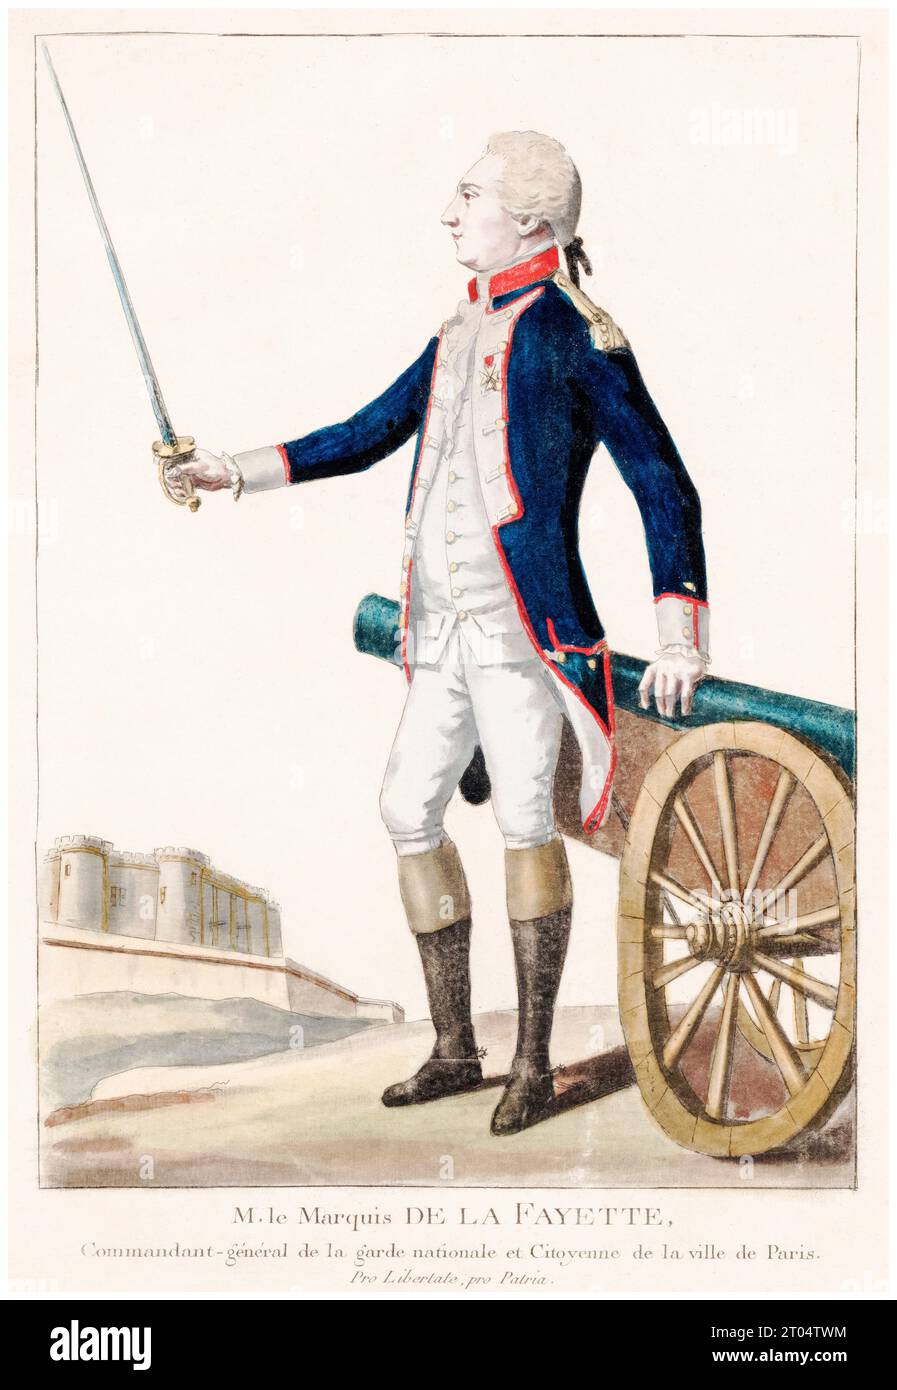 Lafayette. Portrait of French aristocrat, freemason, and military officer, Gilbert du Motier, Marquis de La Fayette (1757-1834). Commander-General of the National Guard and citizen of the city of Paris, hand coloured engraving, 1789-1792 Stock Photo